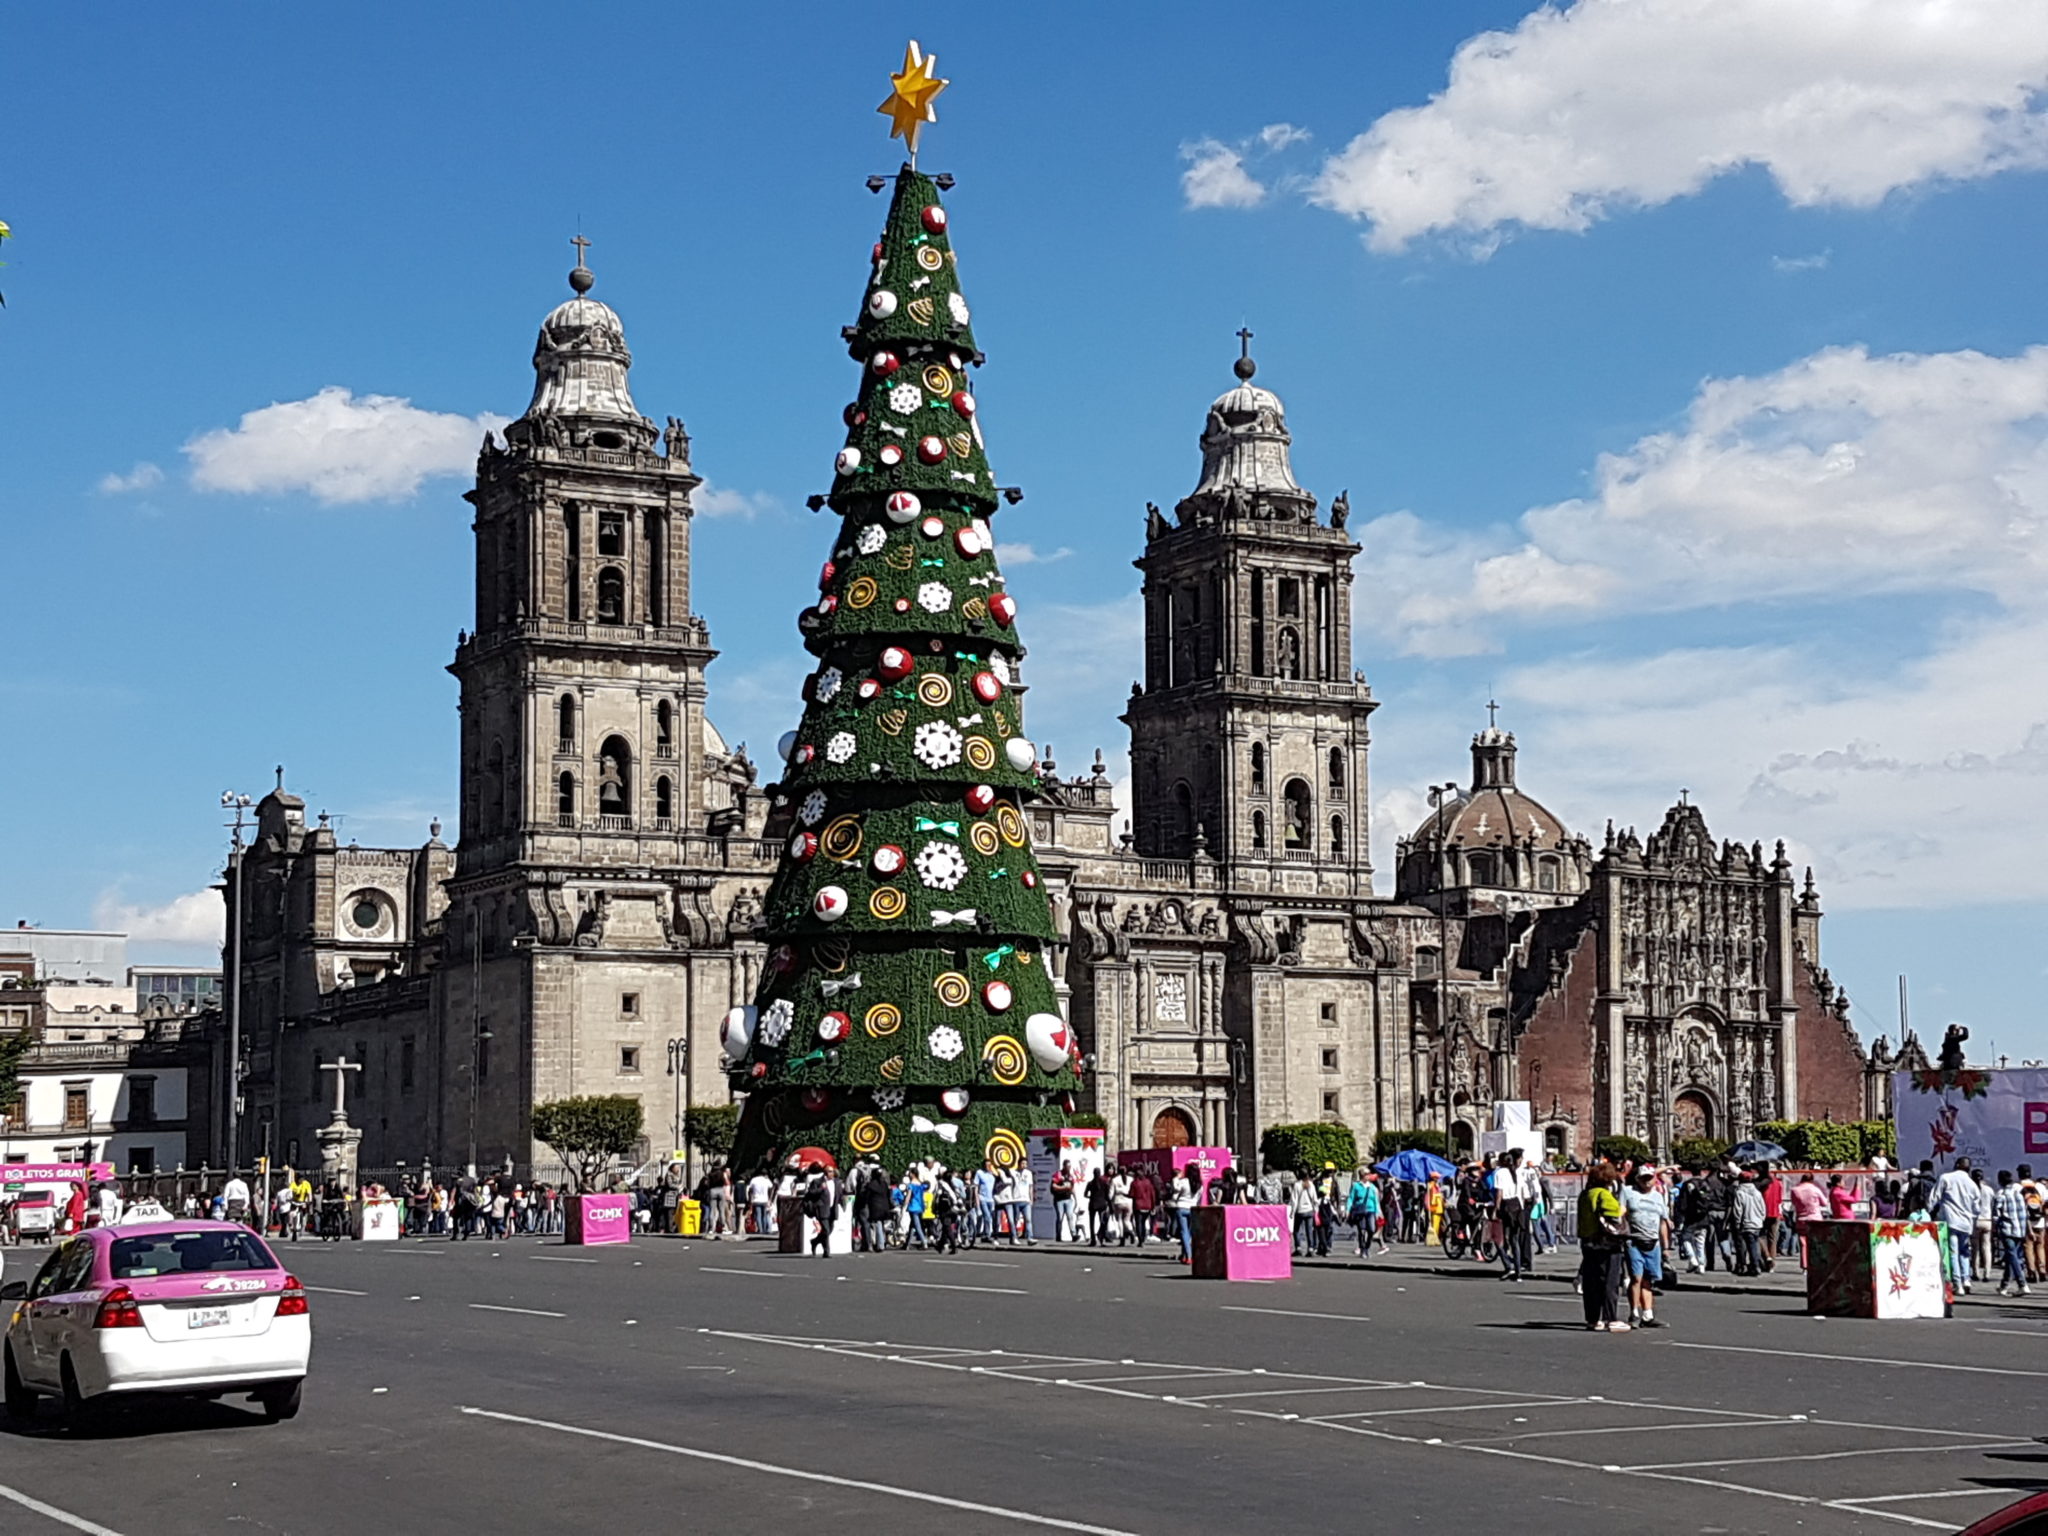 Zócalo: The Birthplace of the Constitution - During Christmas Time